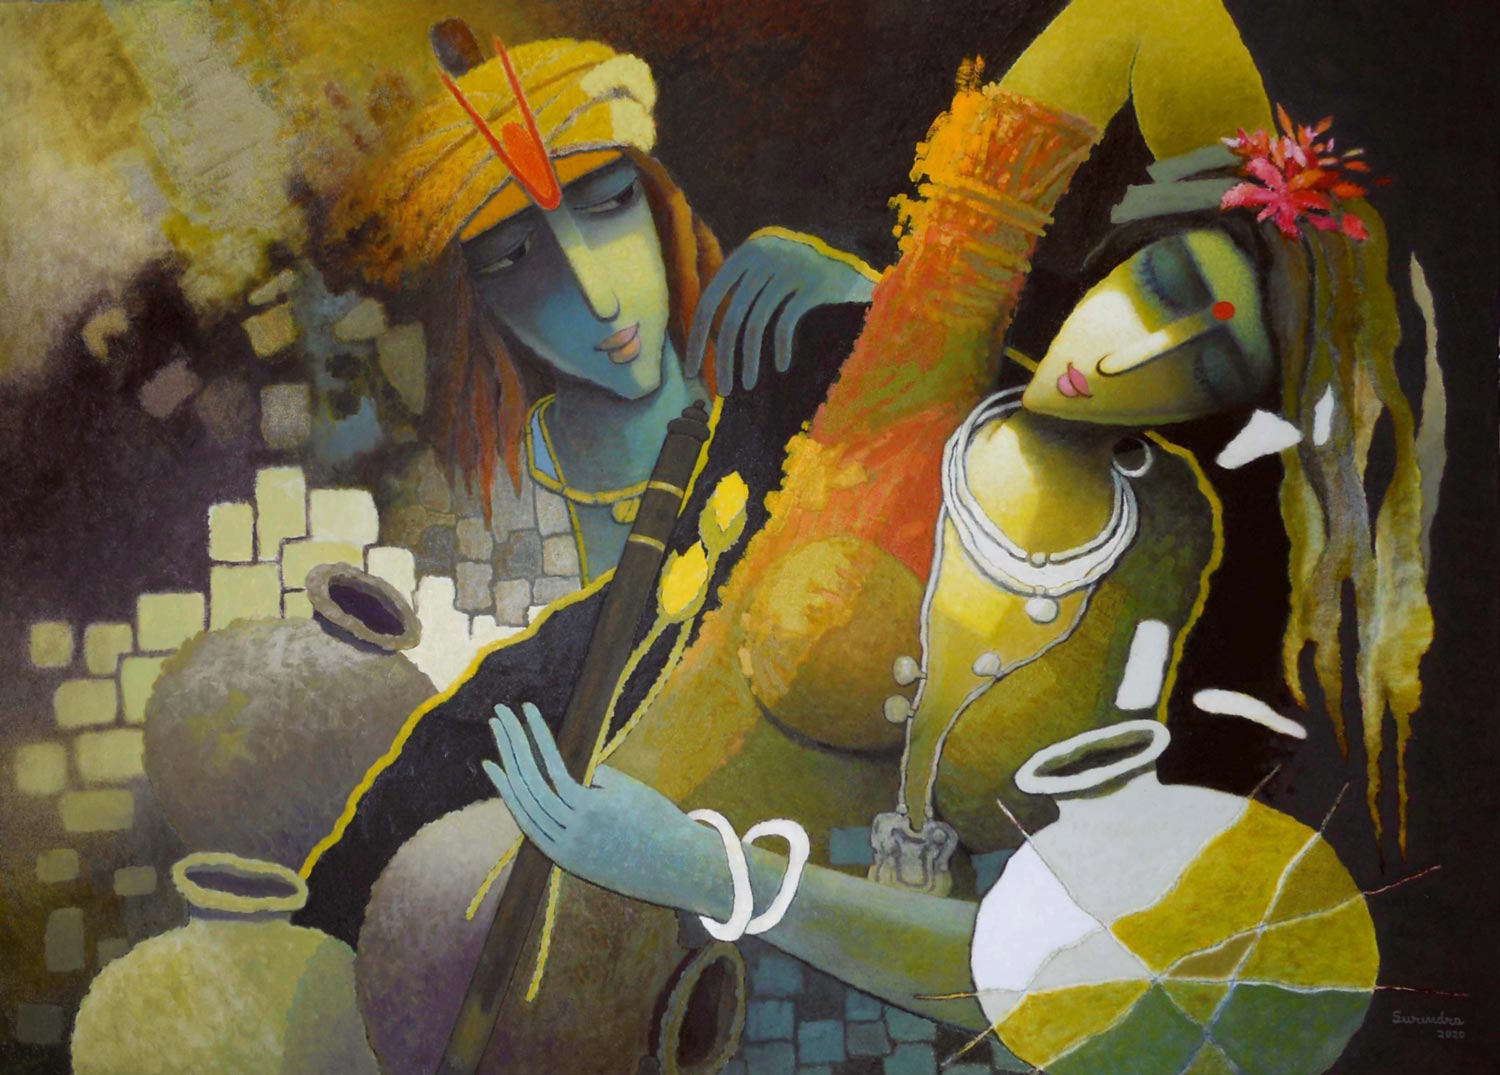 Contemporary Painting with Oil on Canvas "Krishna" art by Surendra Pal Singh